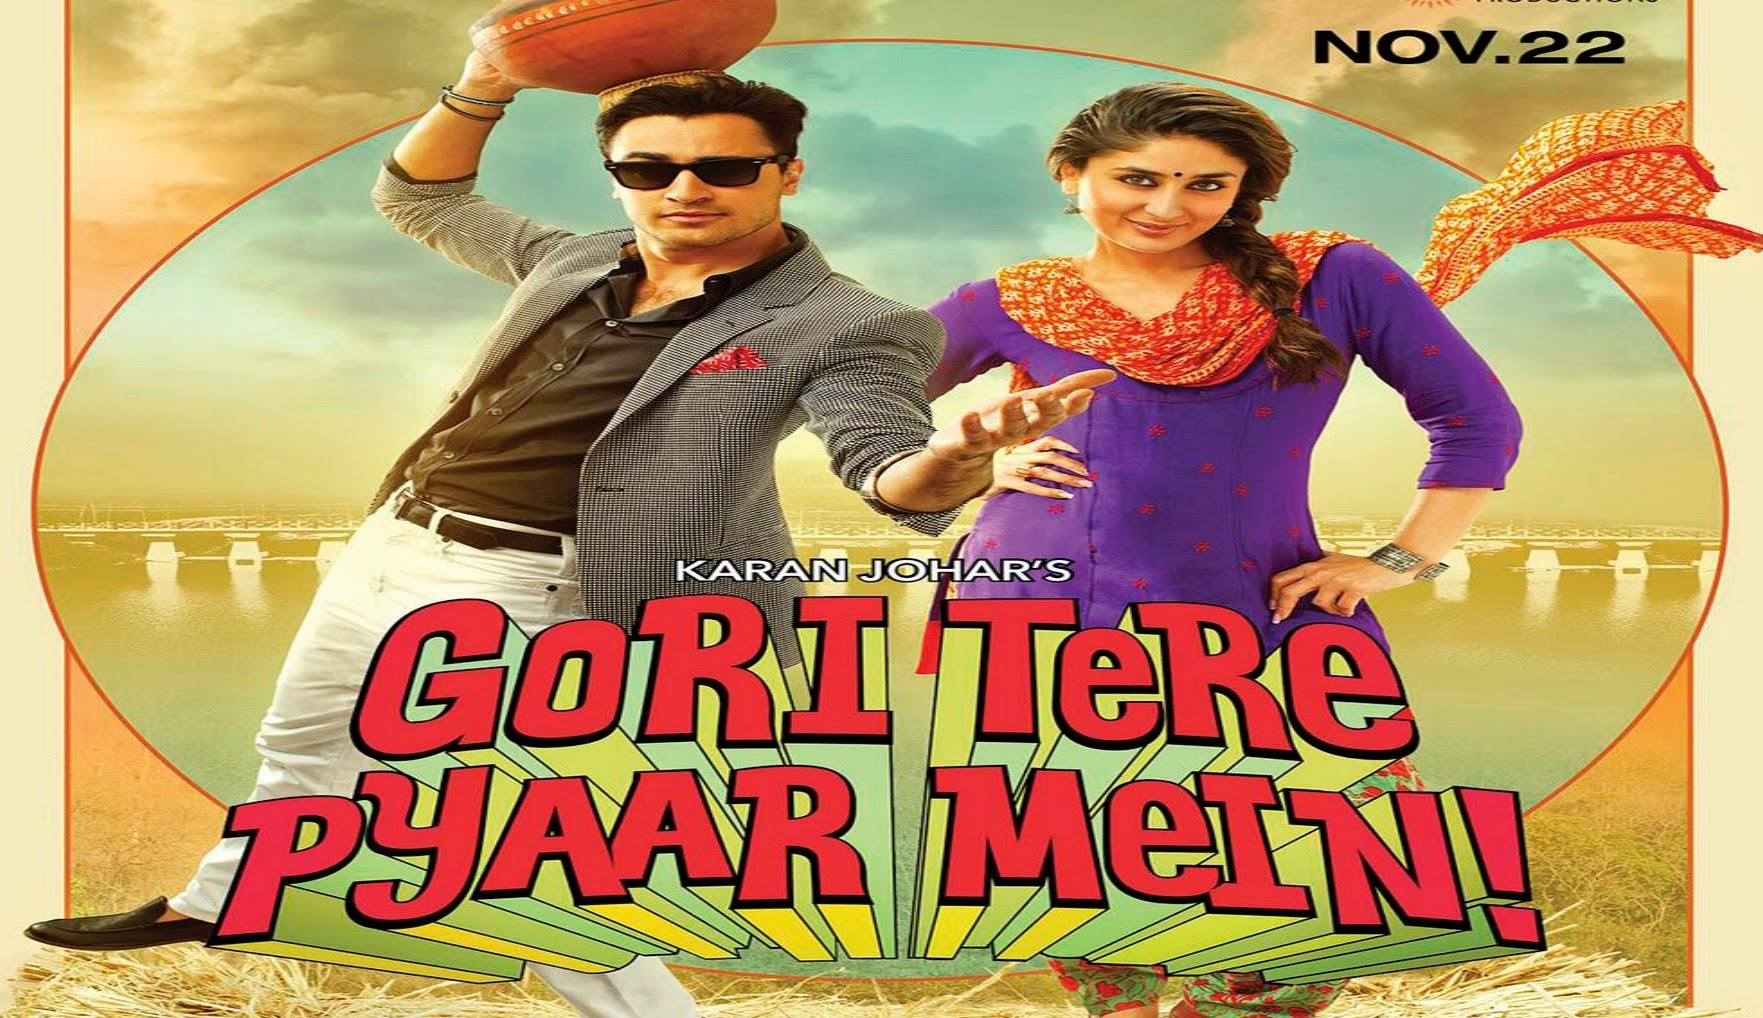 Gori Tere Pyaar Mein Backgrounds, Compatible - PC, Mobile, Gadgets| 1763x1018 px